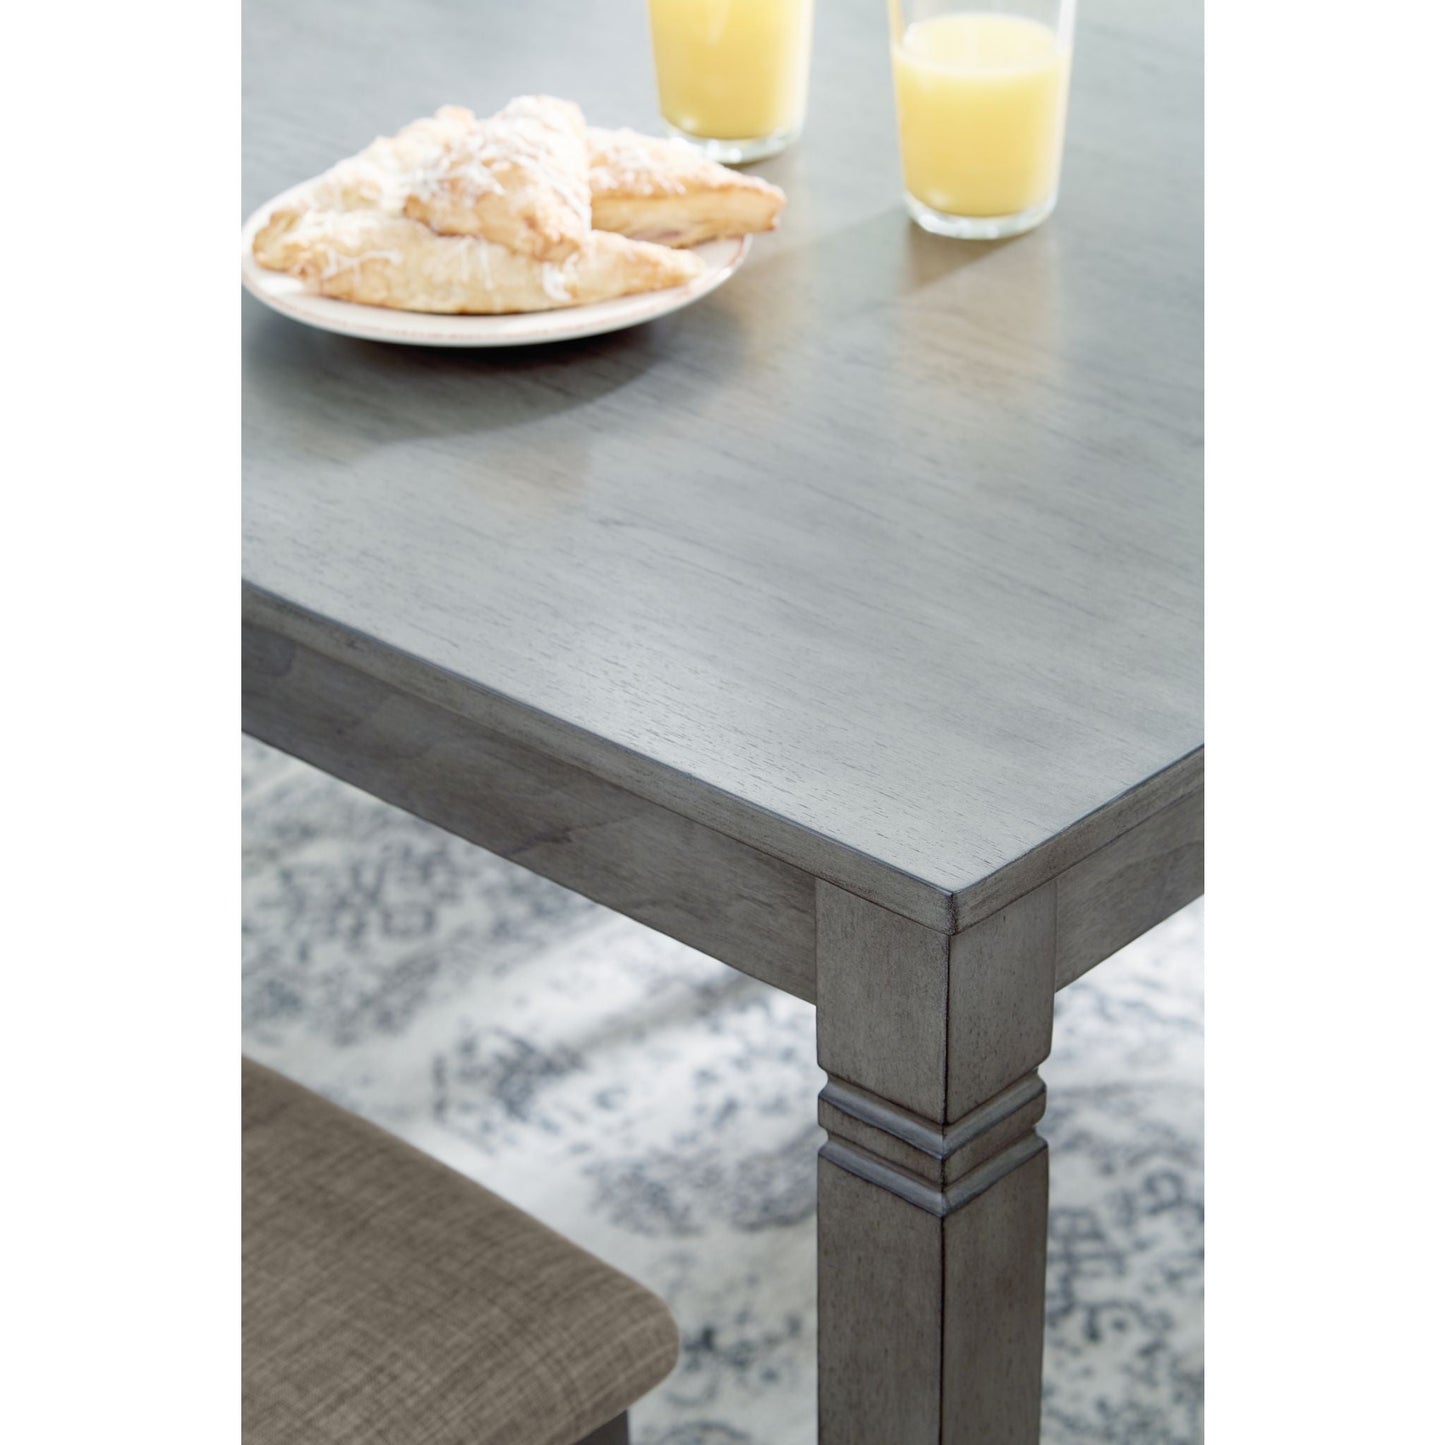 Jayemyer 7 Piece Casual Dining - Charcoal Gray - (D368-425)